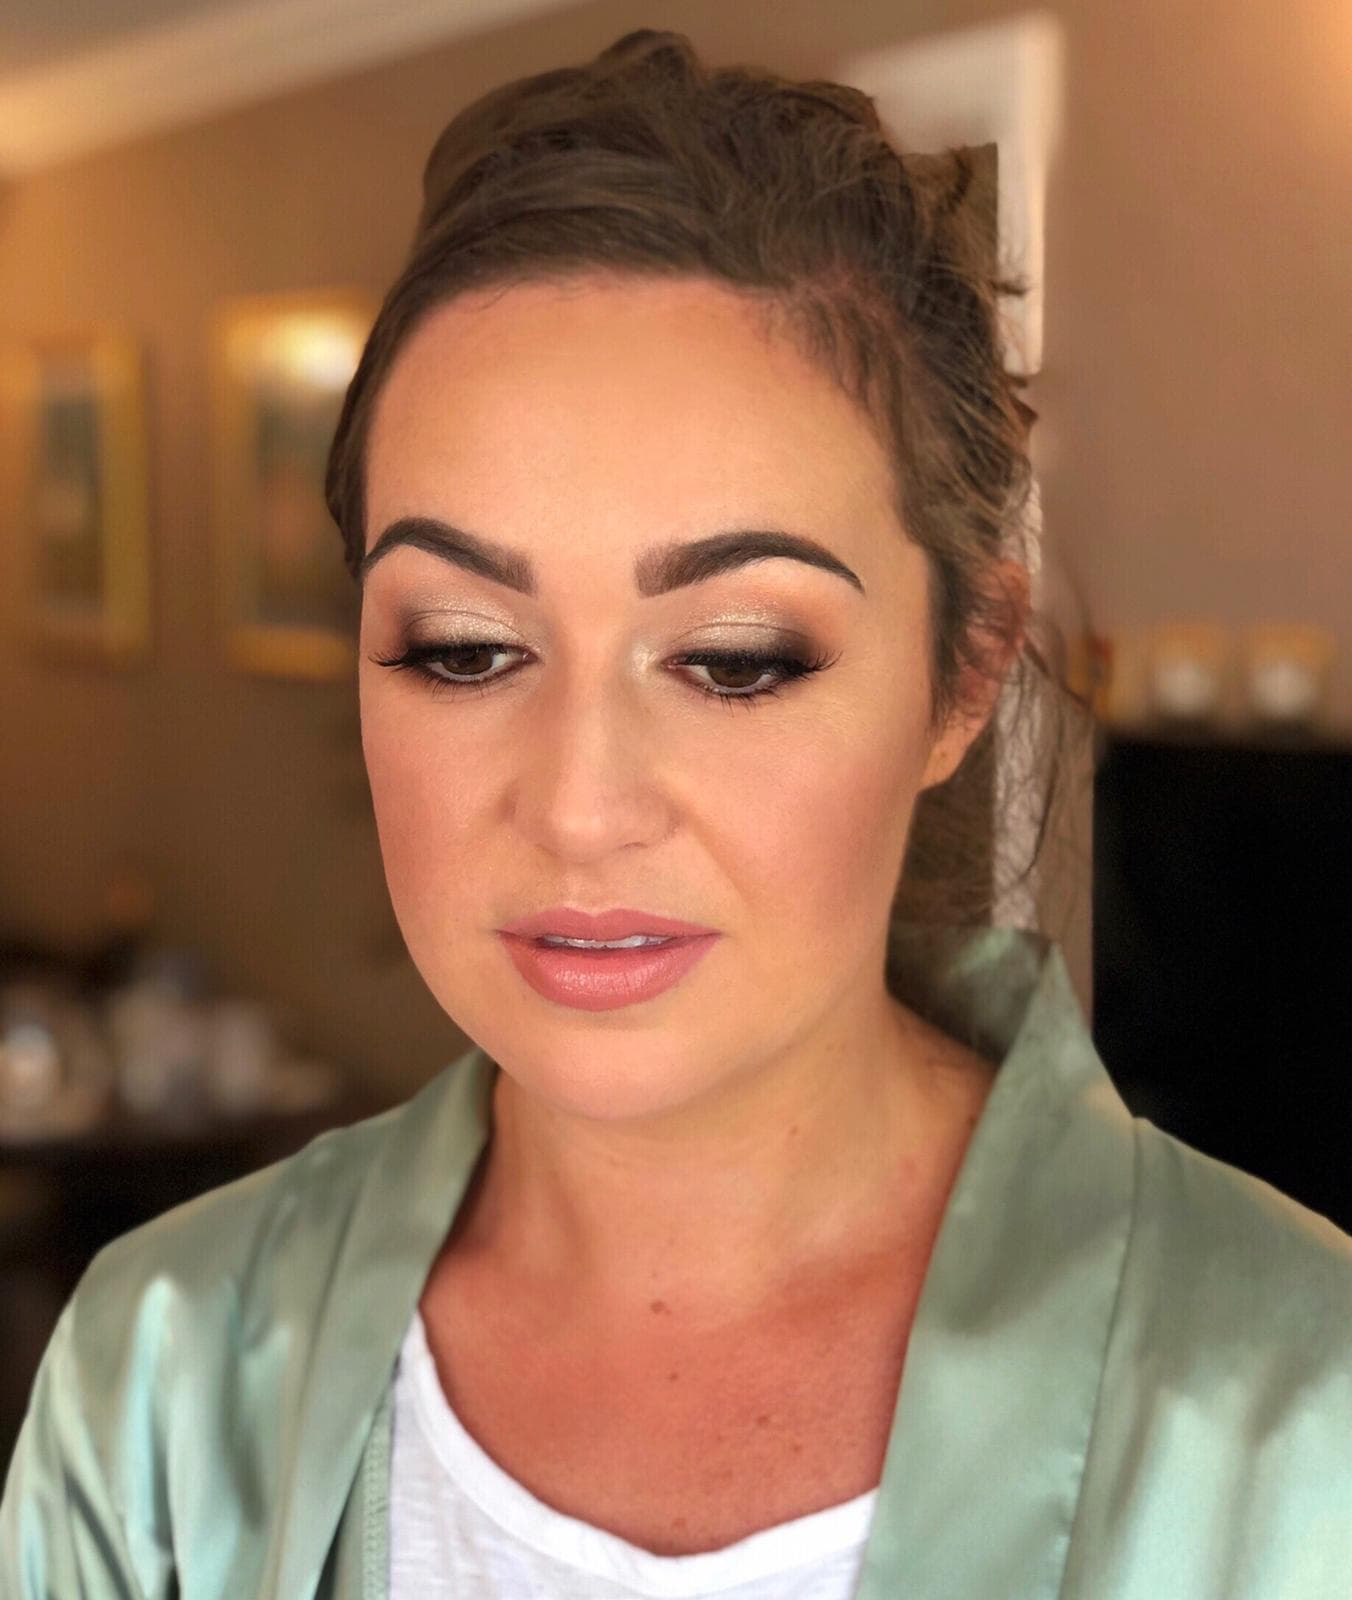 Wedding Makeup at Cantley House in Wokingham by Christiane Dowling Makeup Artistry